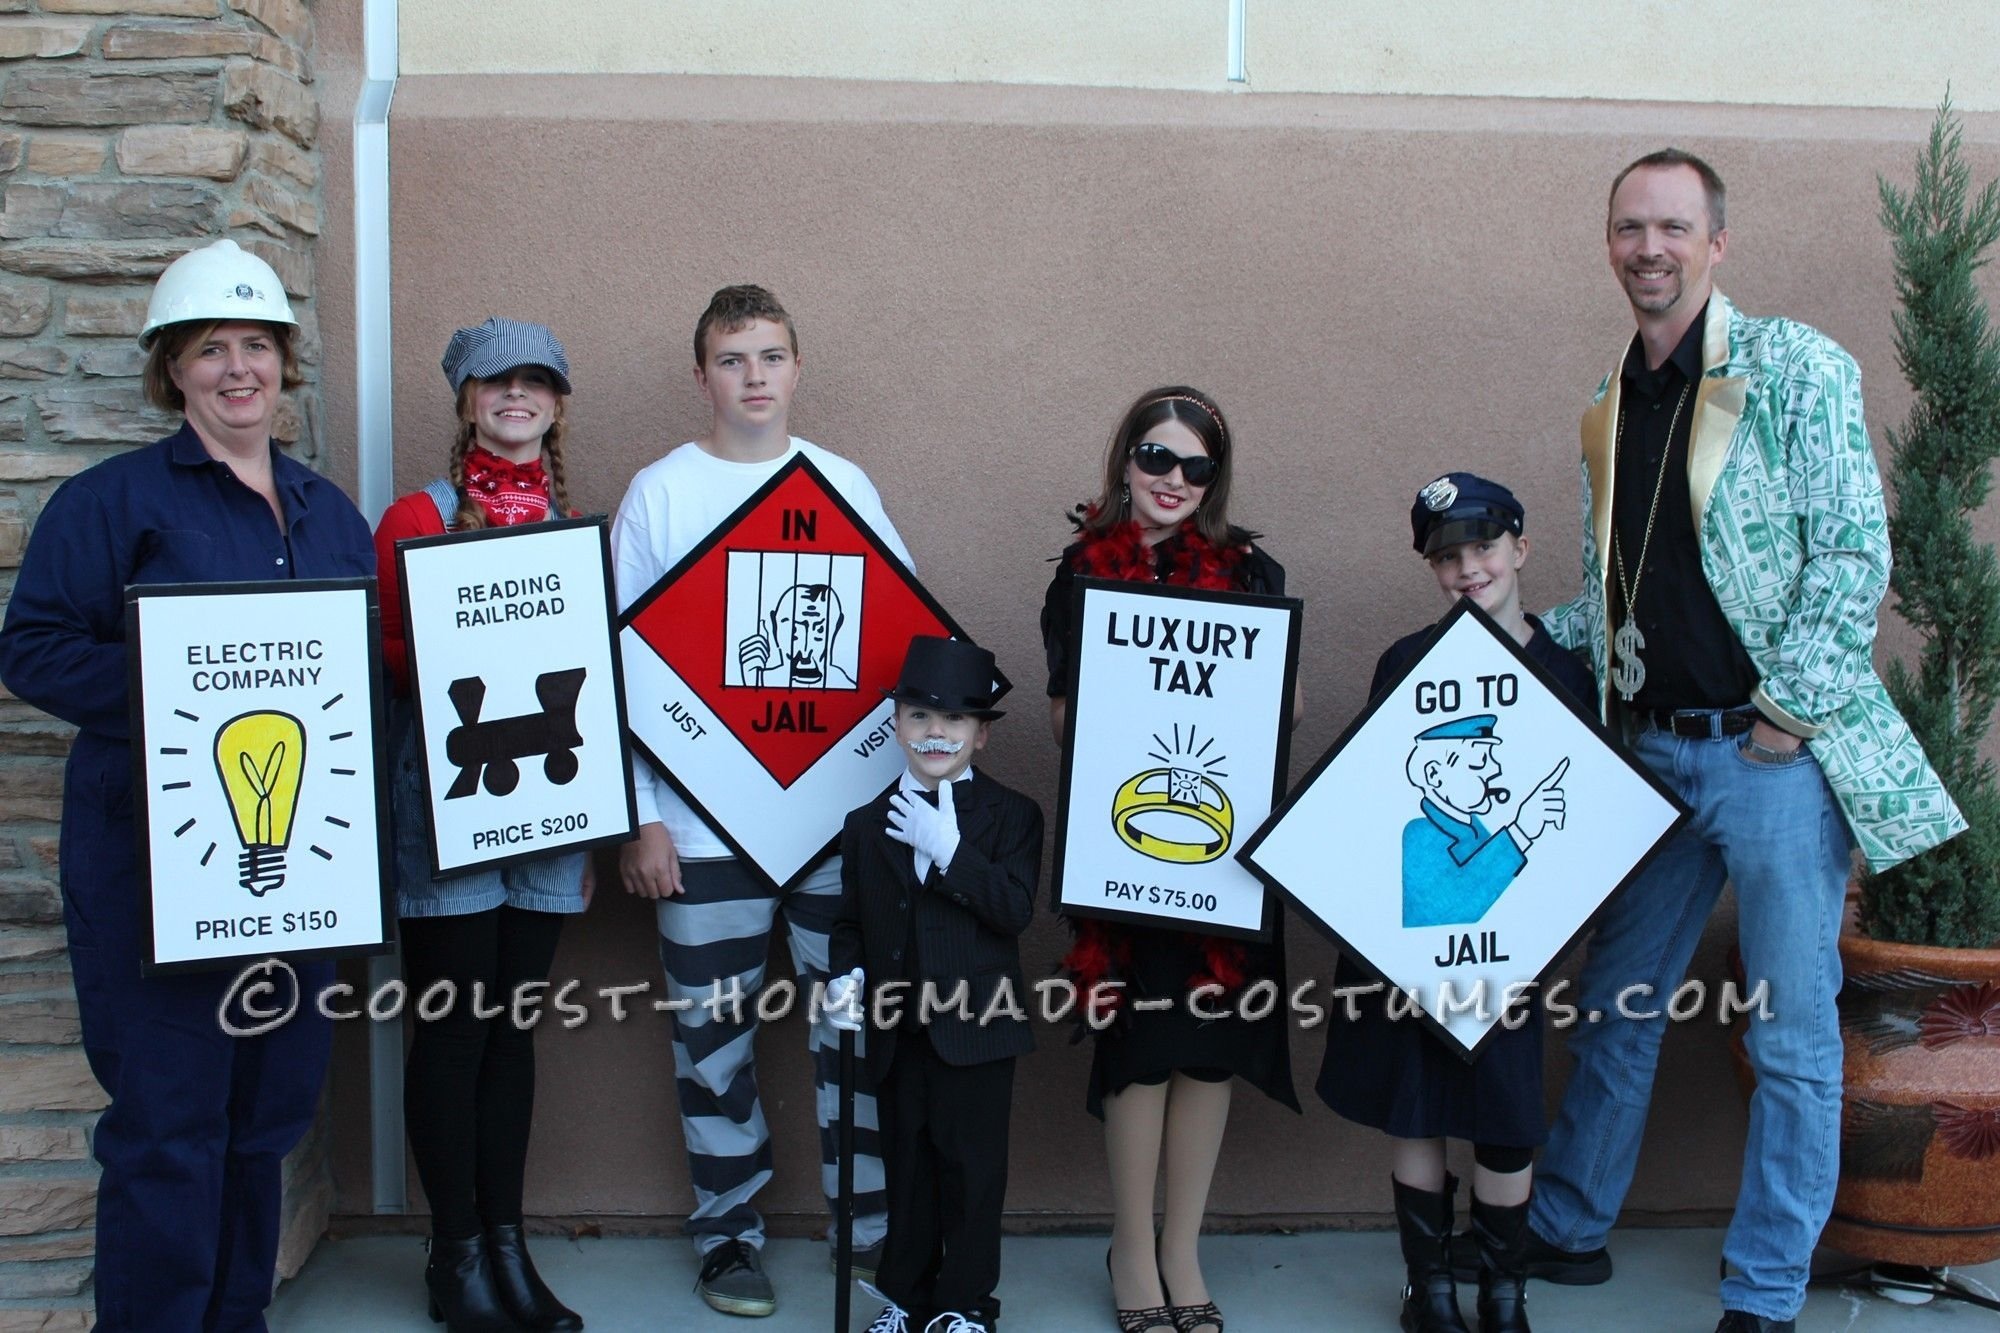 10 Most Popular Group Costume Ideas For Guys easy unique inexpensive contest winning monopoly group family 2022